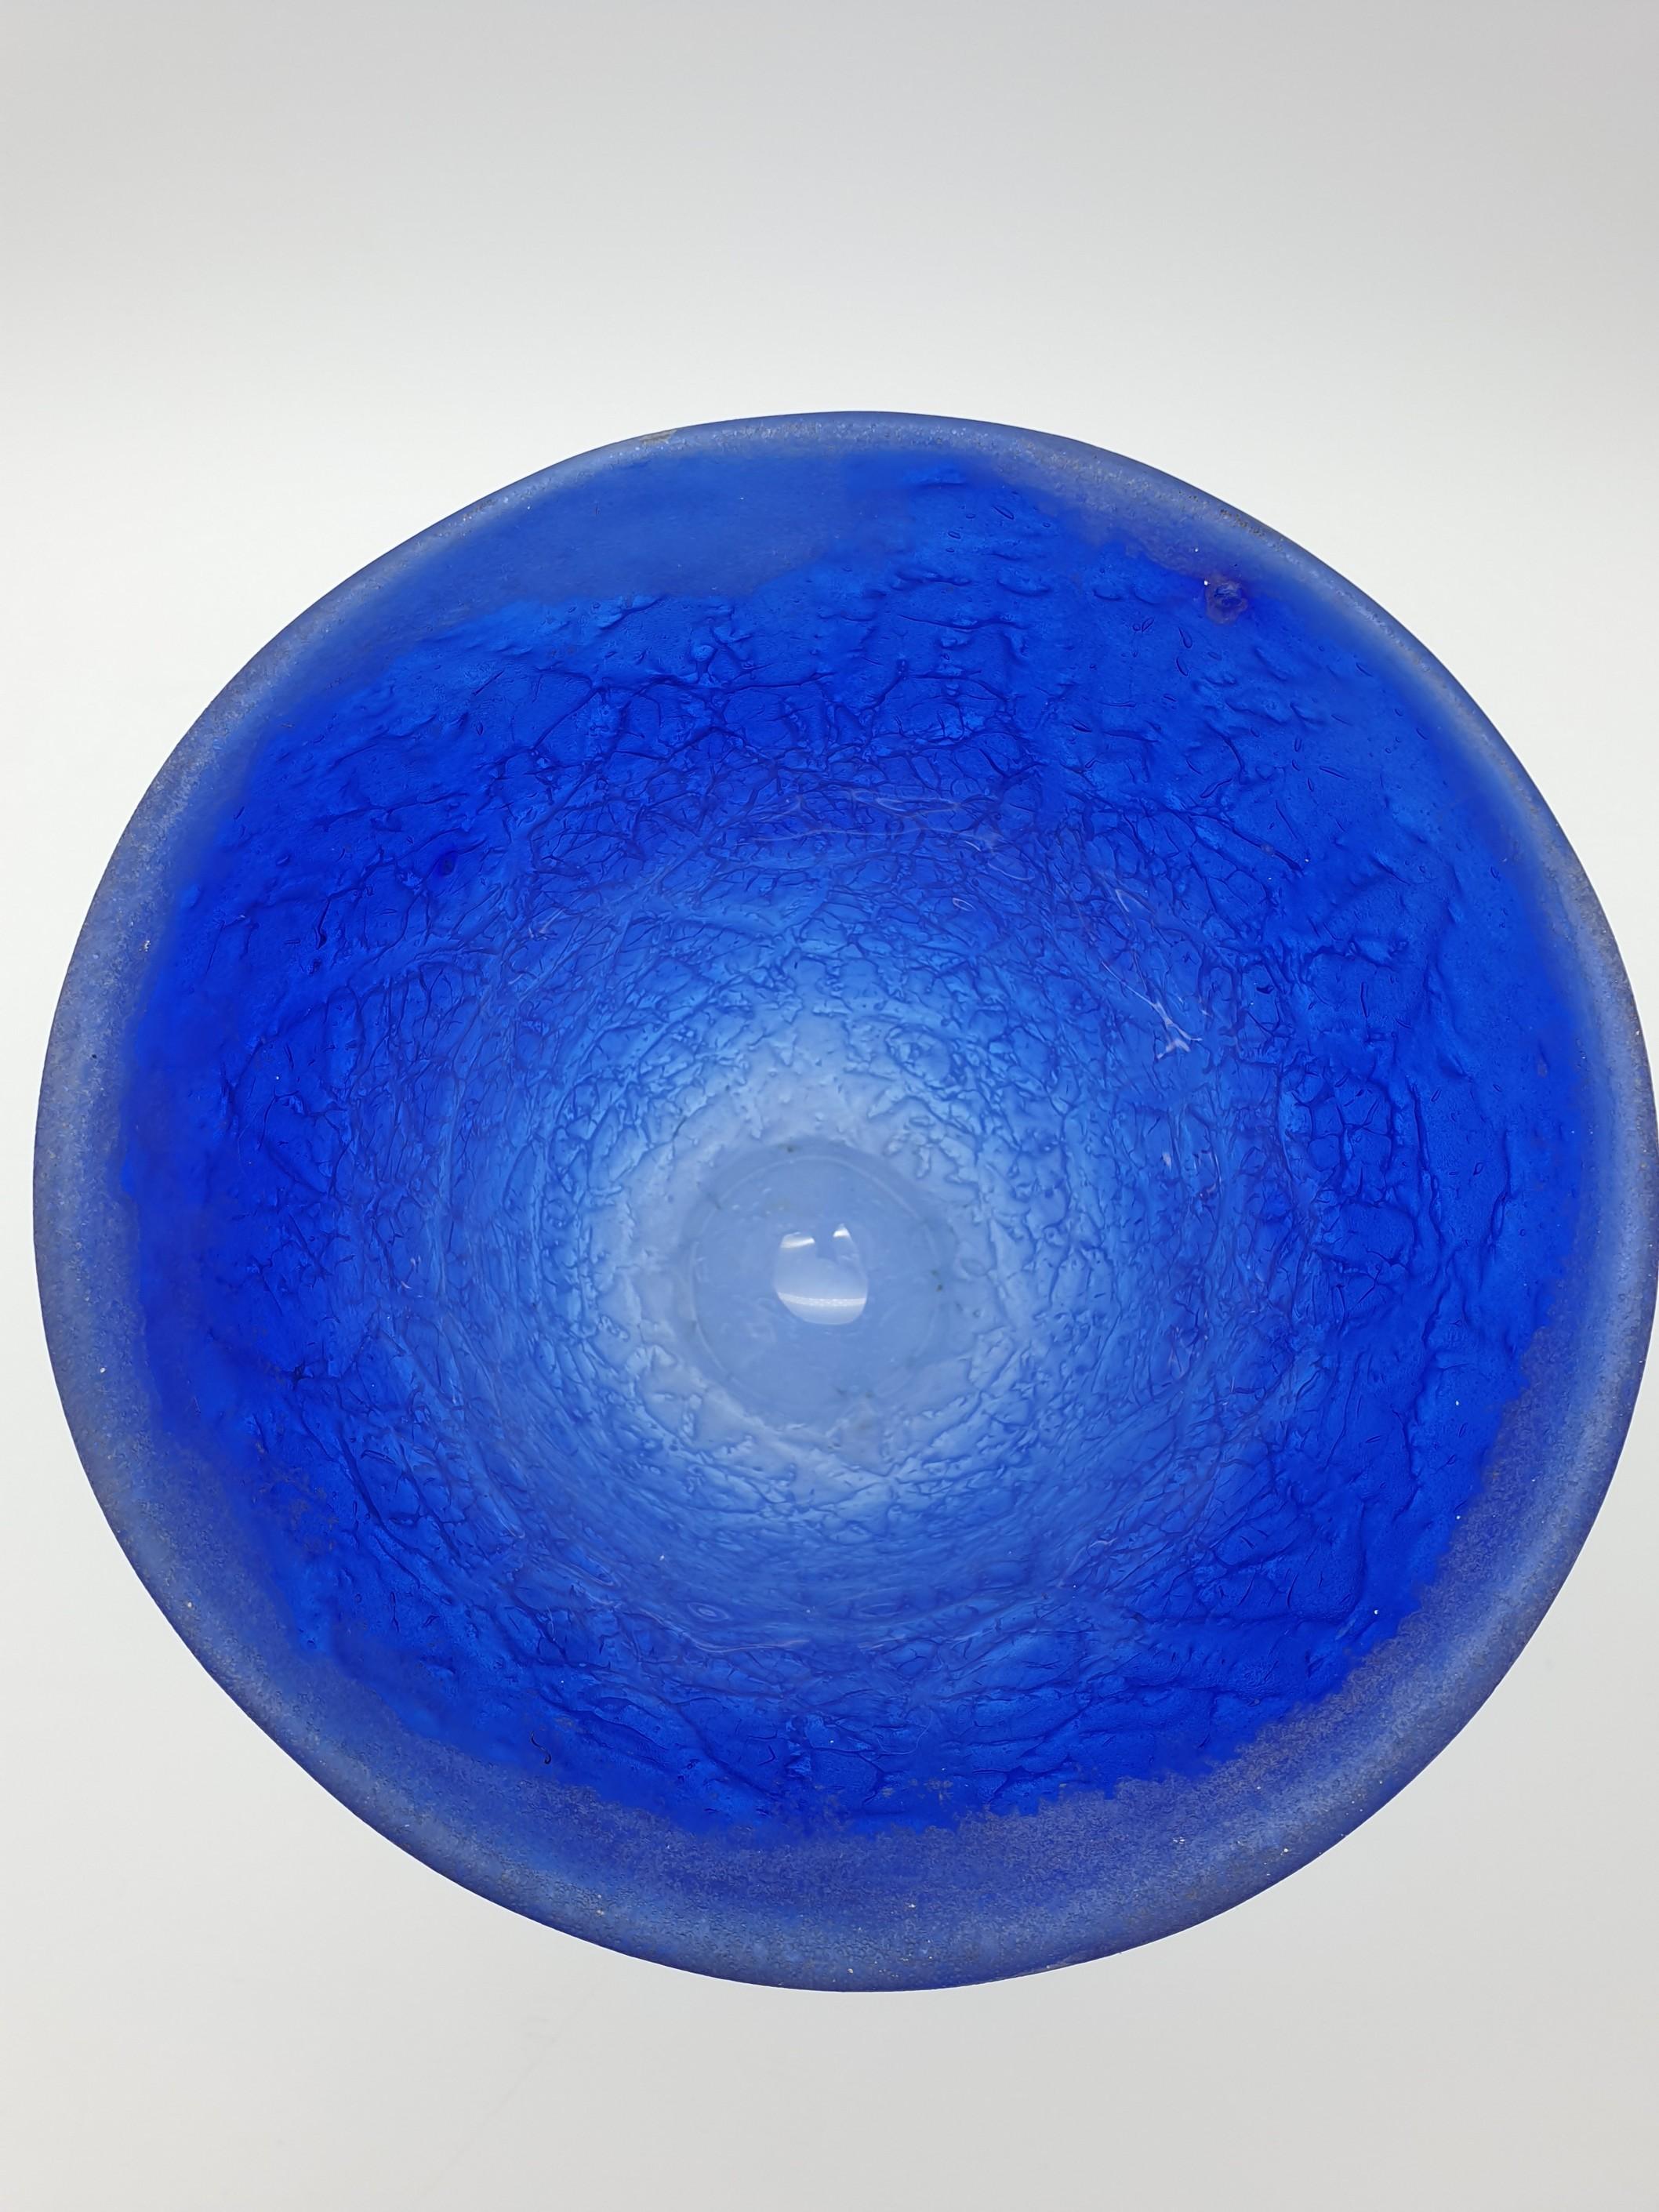 Modern royal blue Murano glass vase made by Gino Cenedese e Figlio. This vase is completely handmade and features the peculiar texture called 